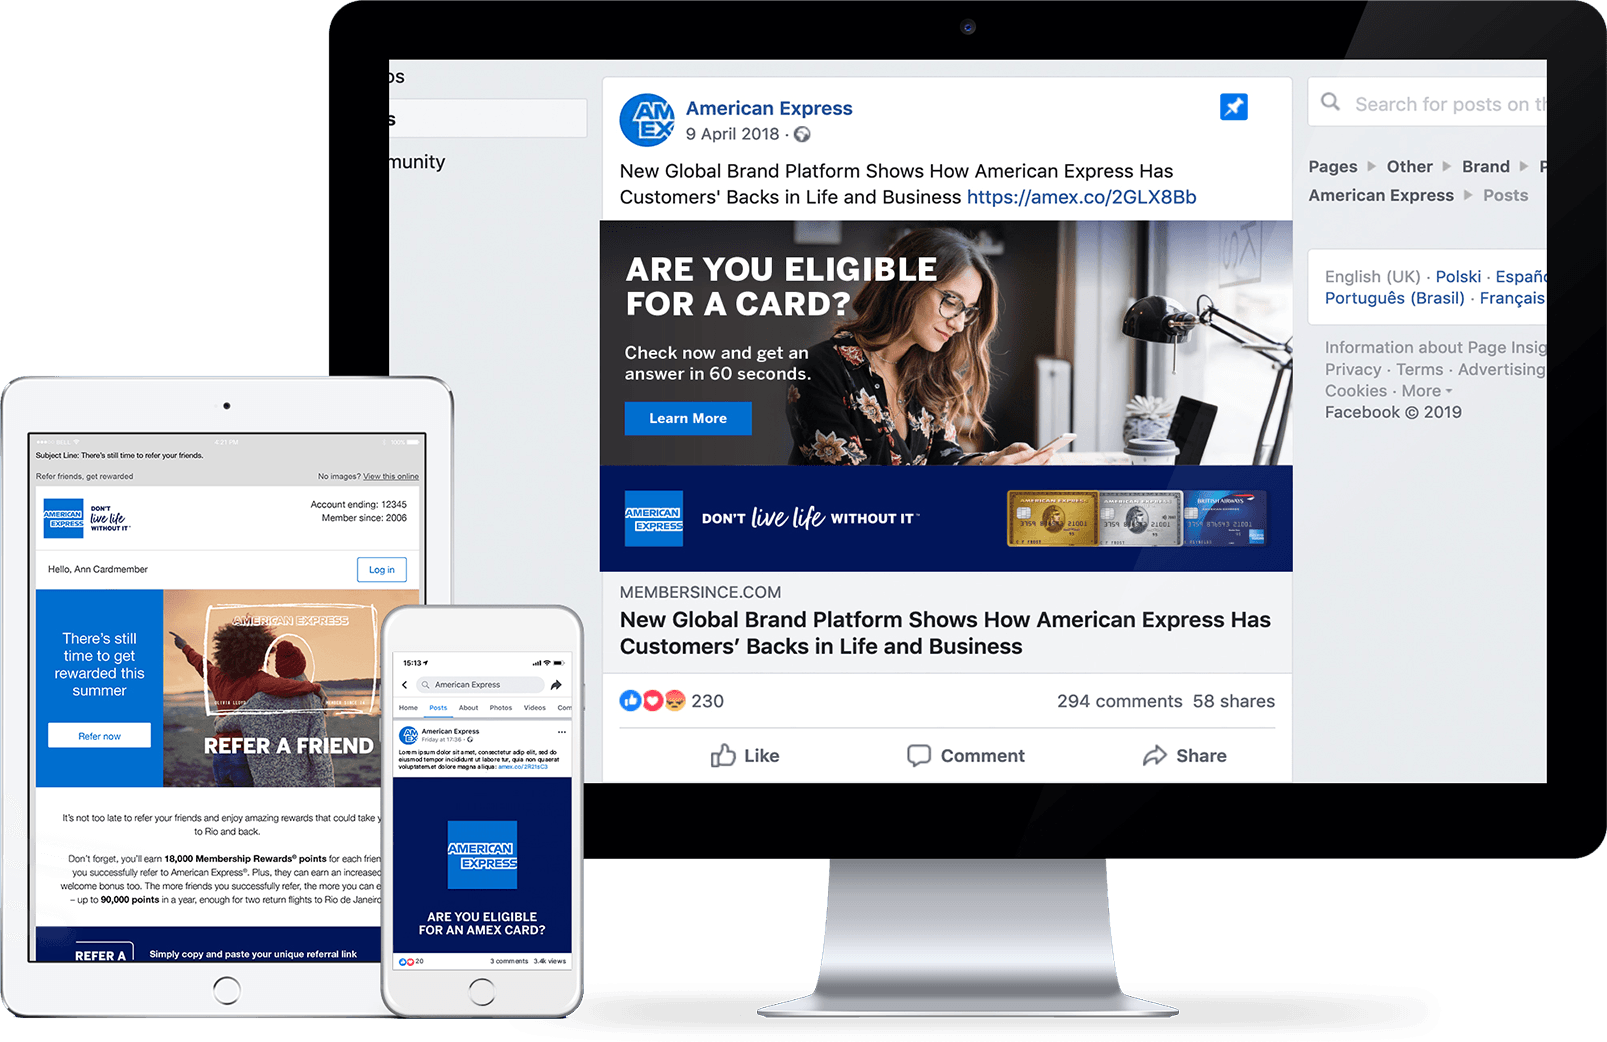 American Express marketing designs on an iMac, iPad and iPhone.